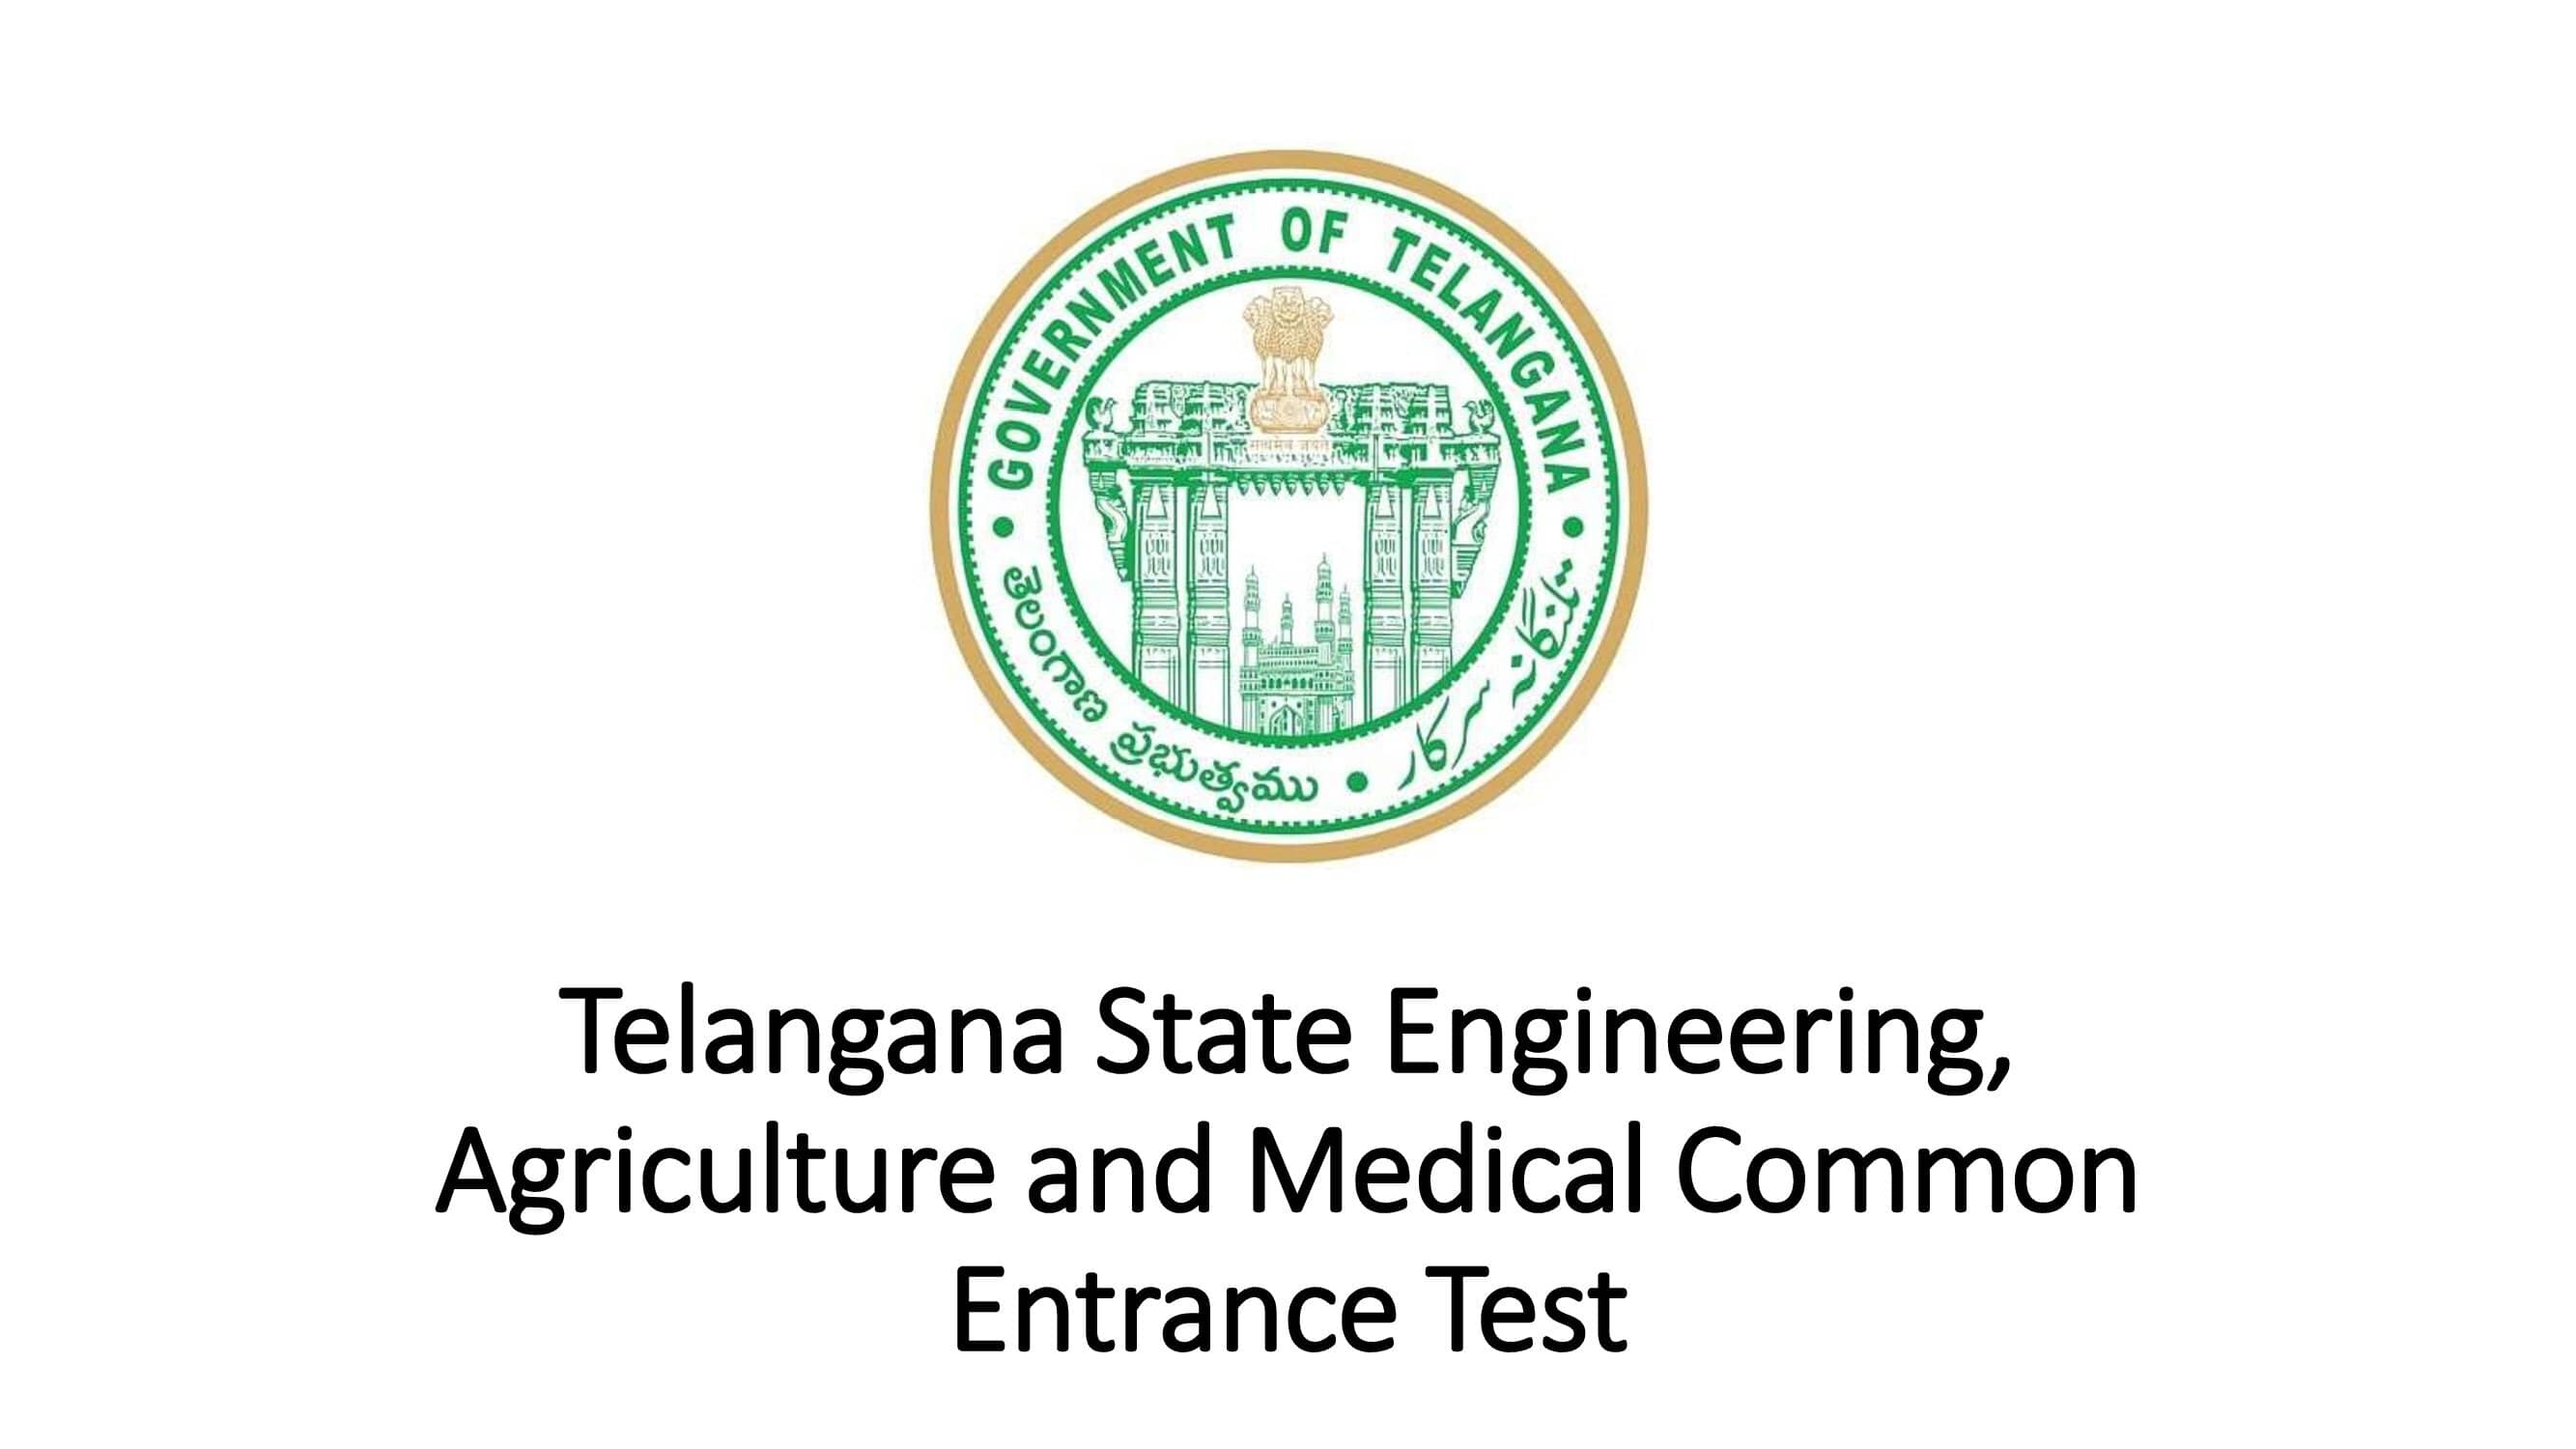 Telangana State Engineering, Agriculture and Medical Common Entrance Test